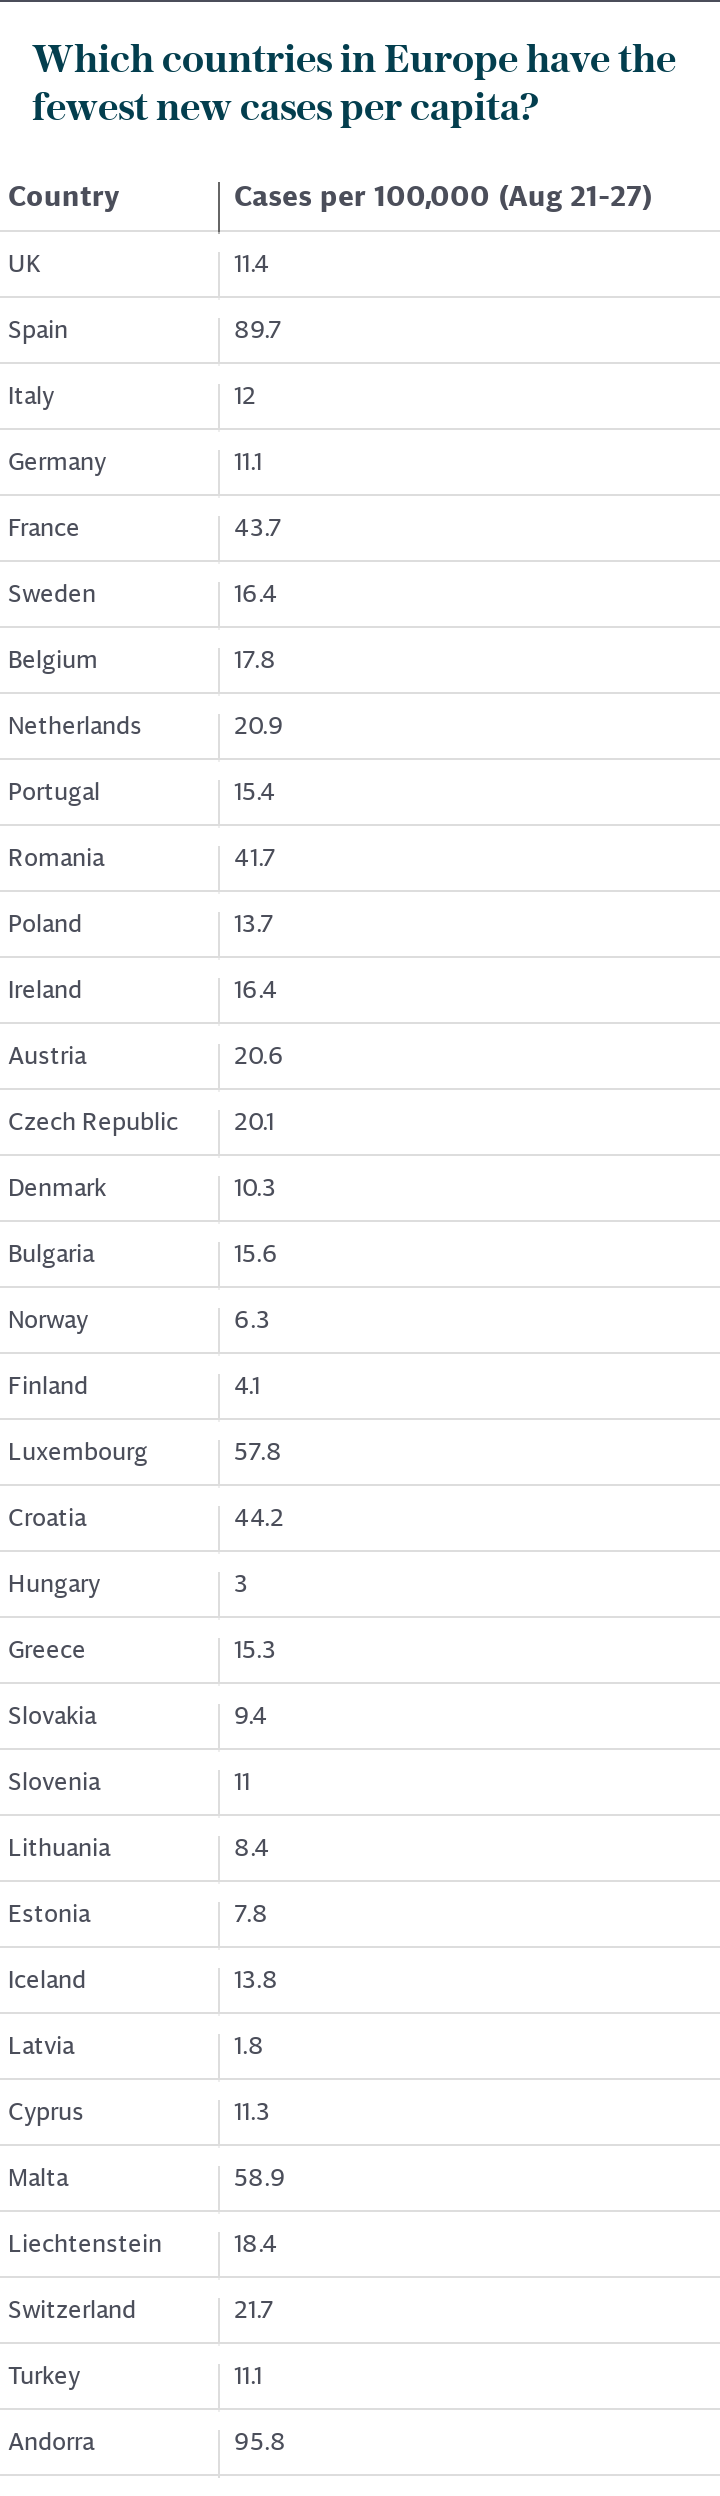 Which countries in Europe have the fewest cases per capita?